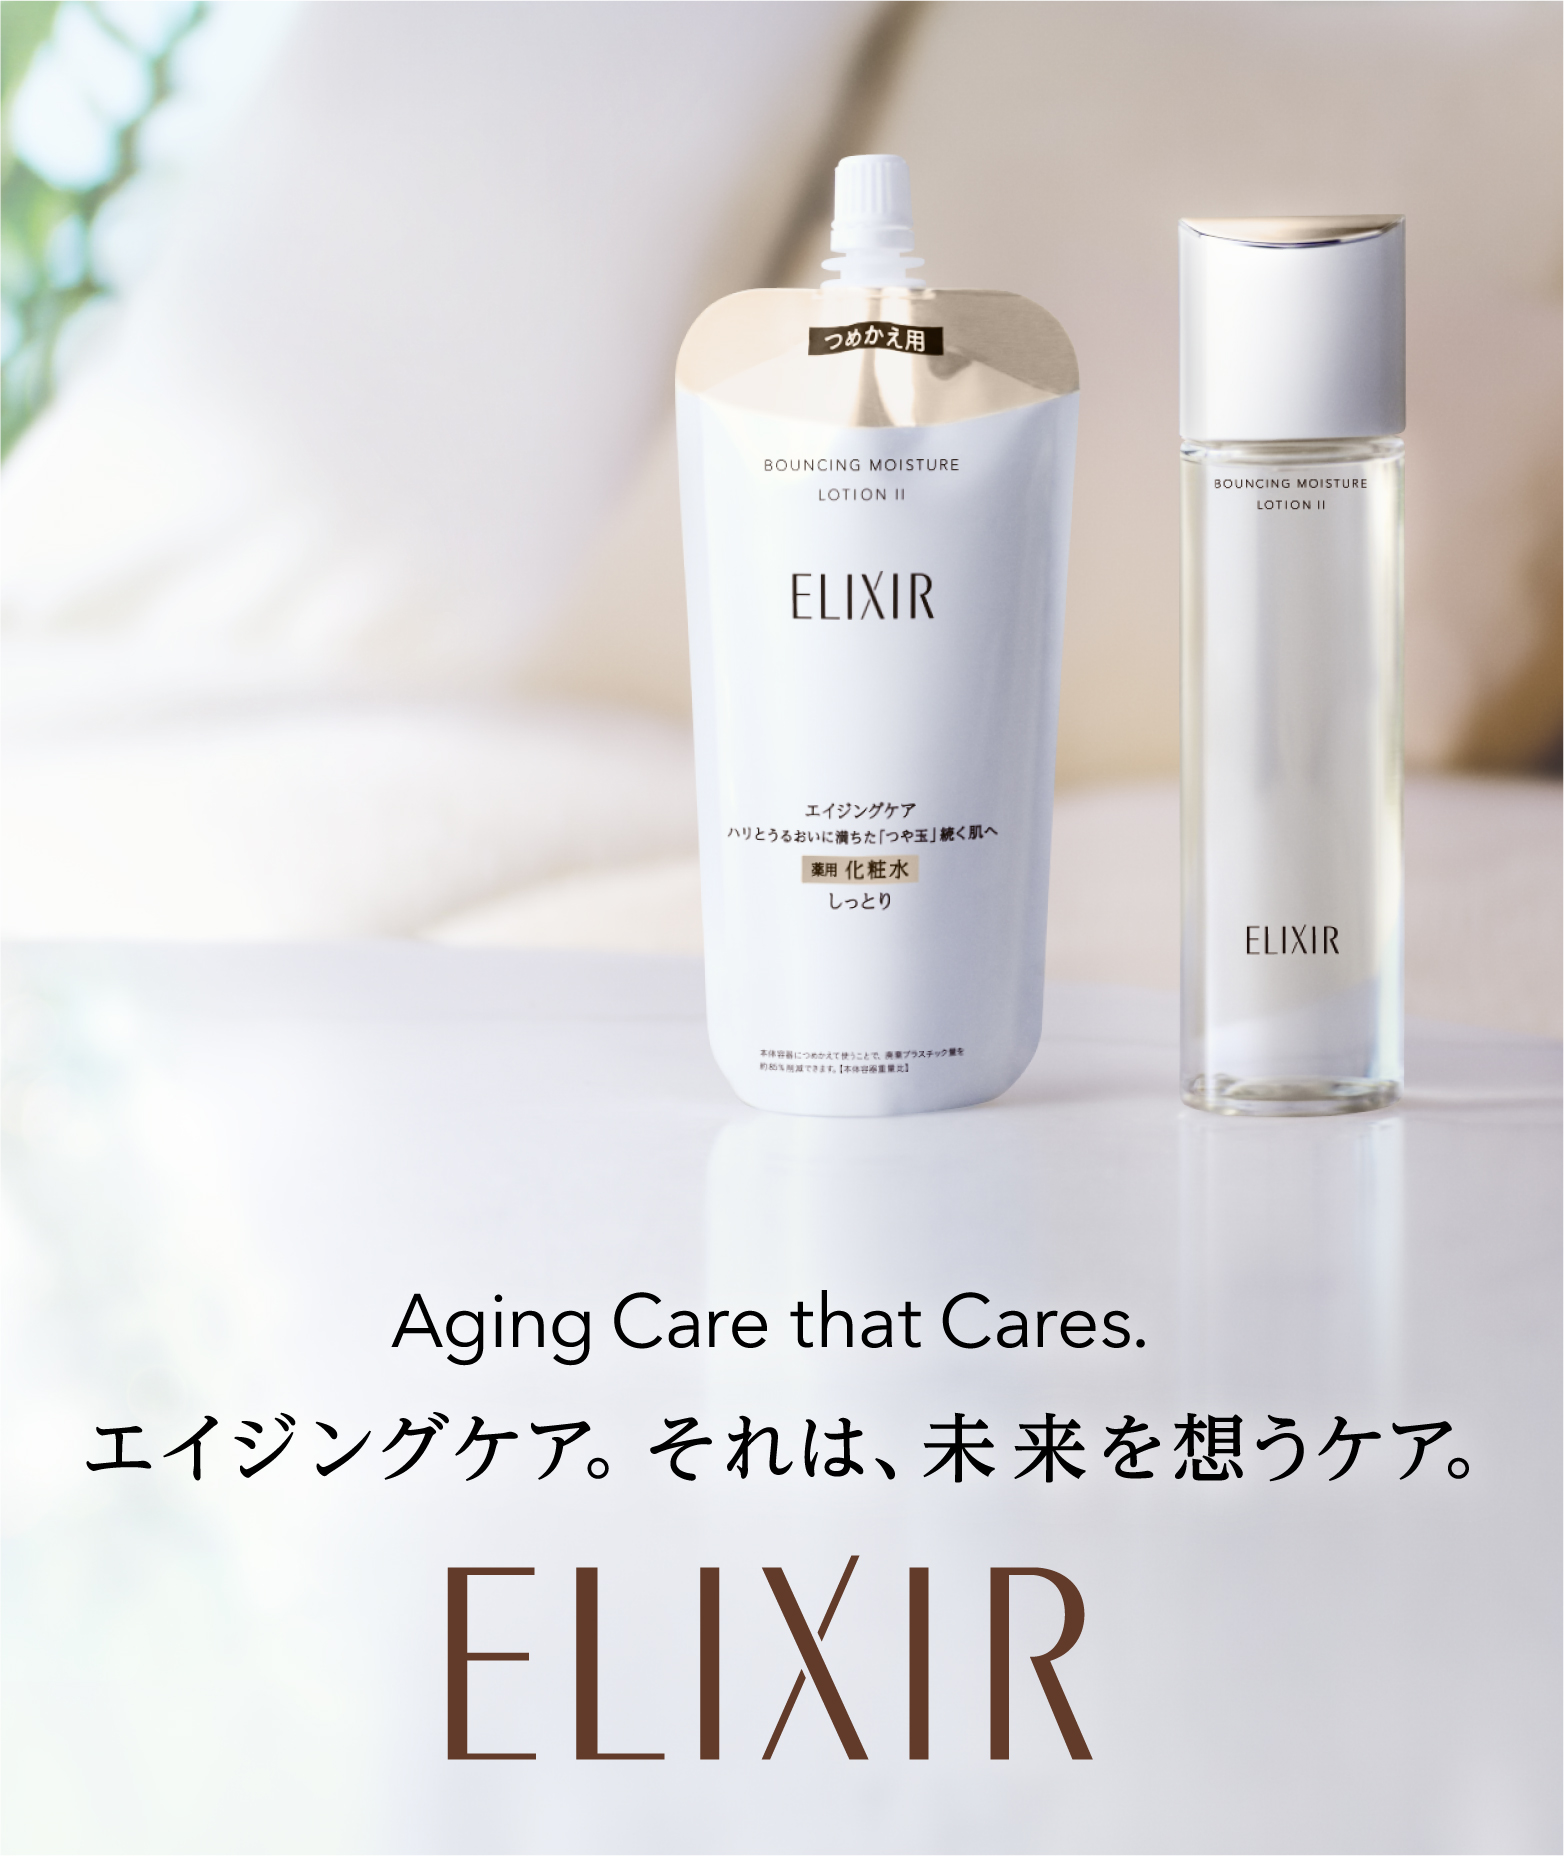 Aging Care that Cares.エイジングケア。それは、未来を想うケア。